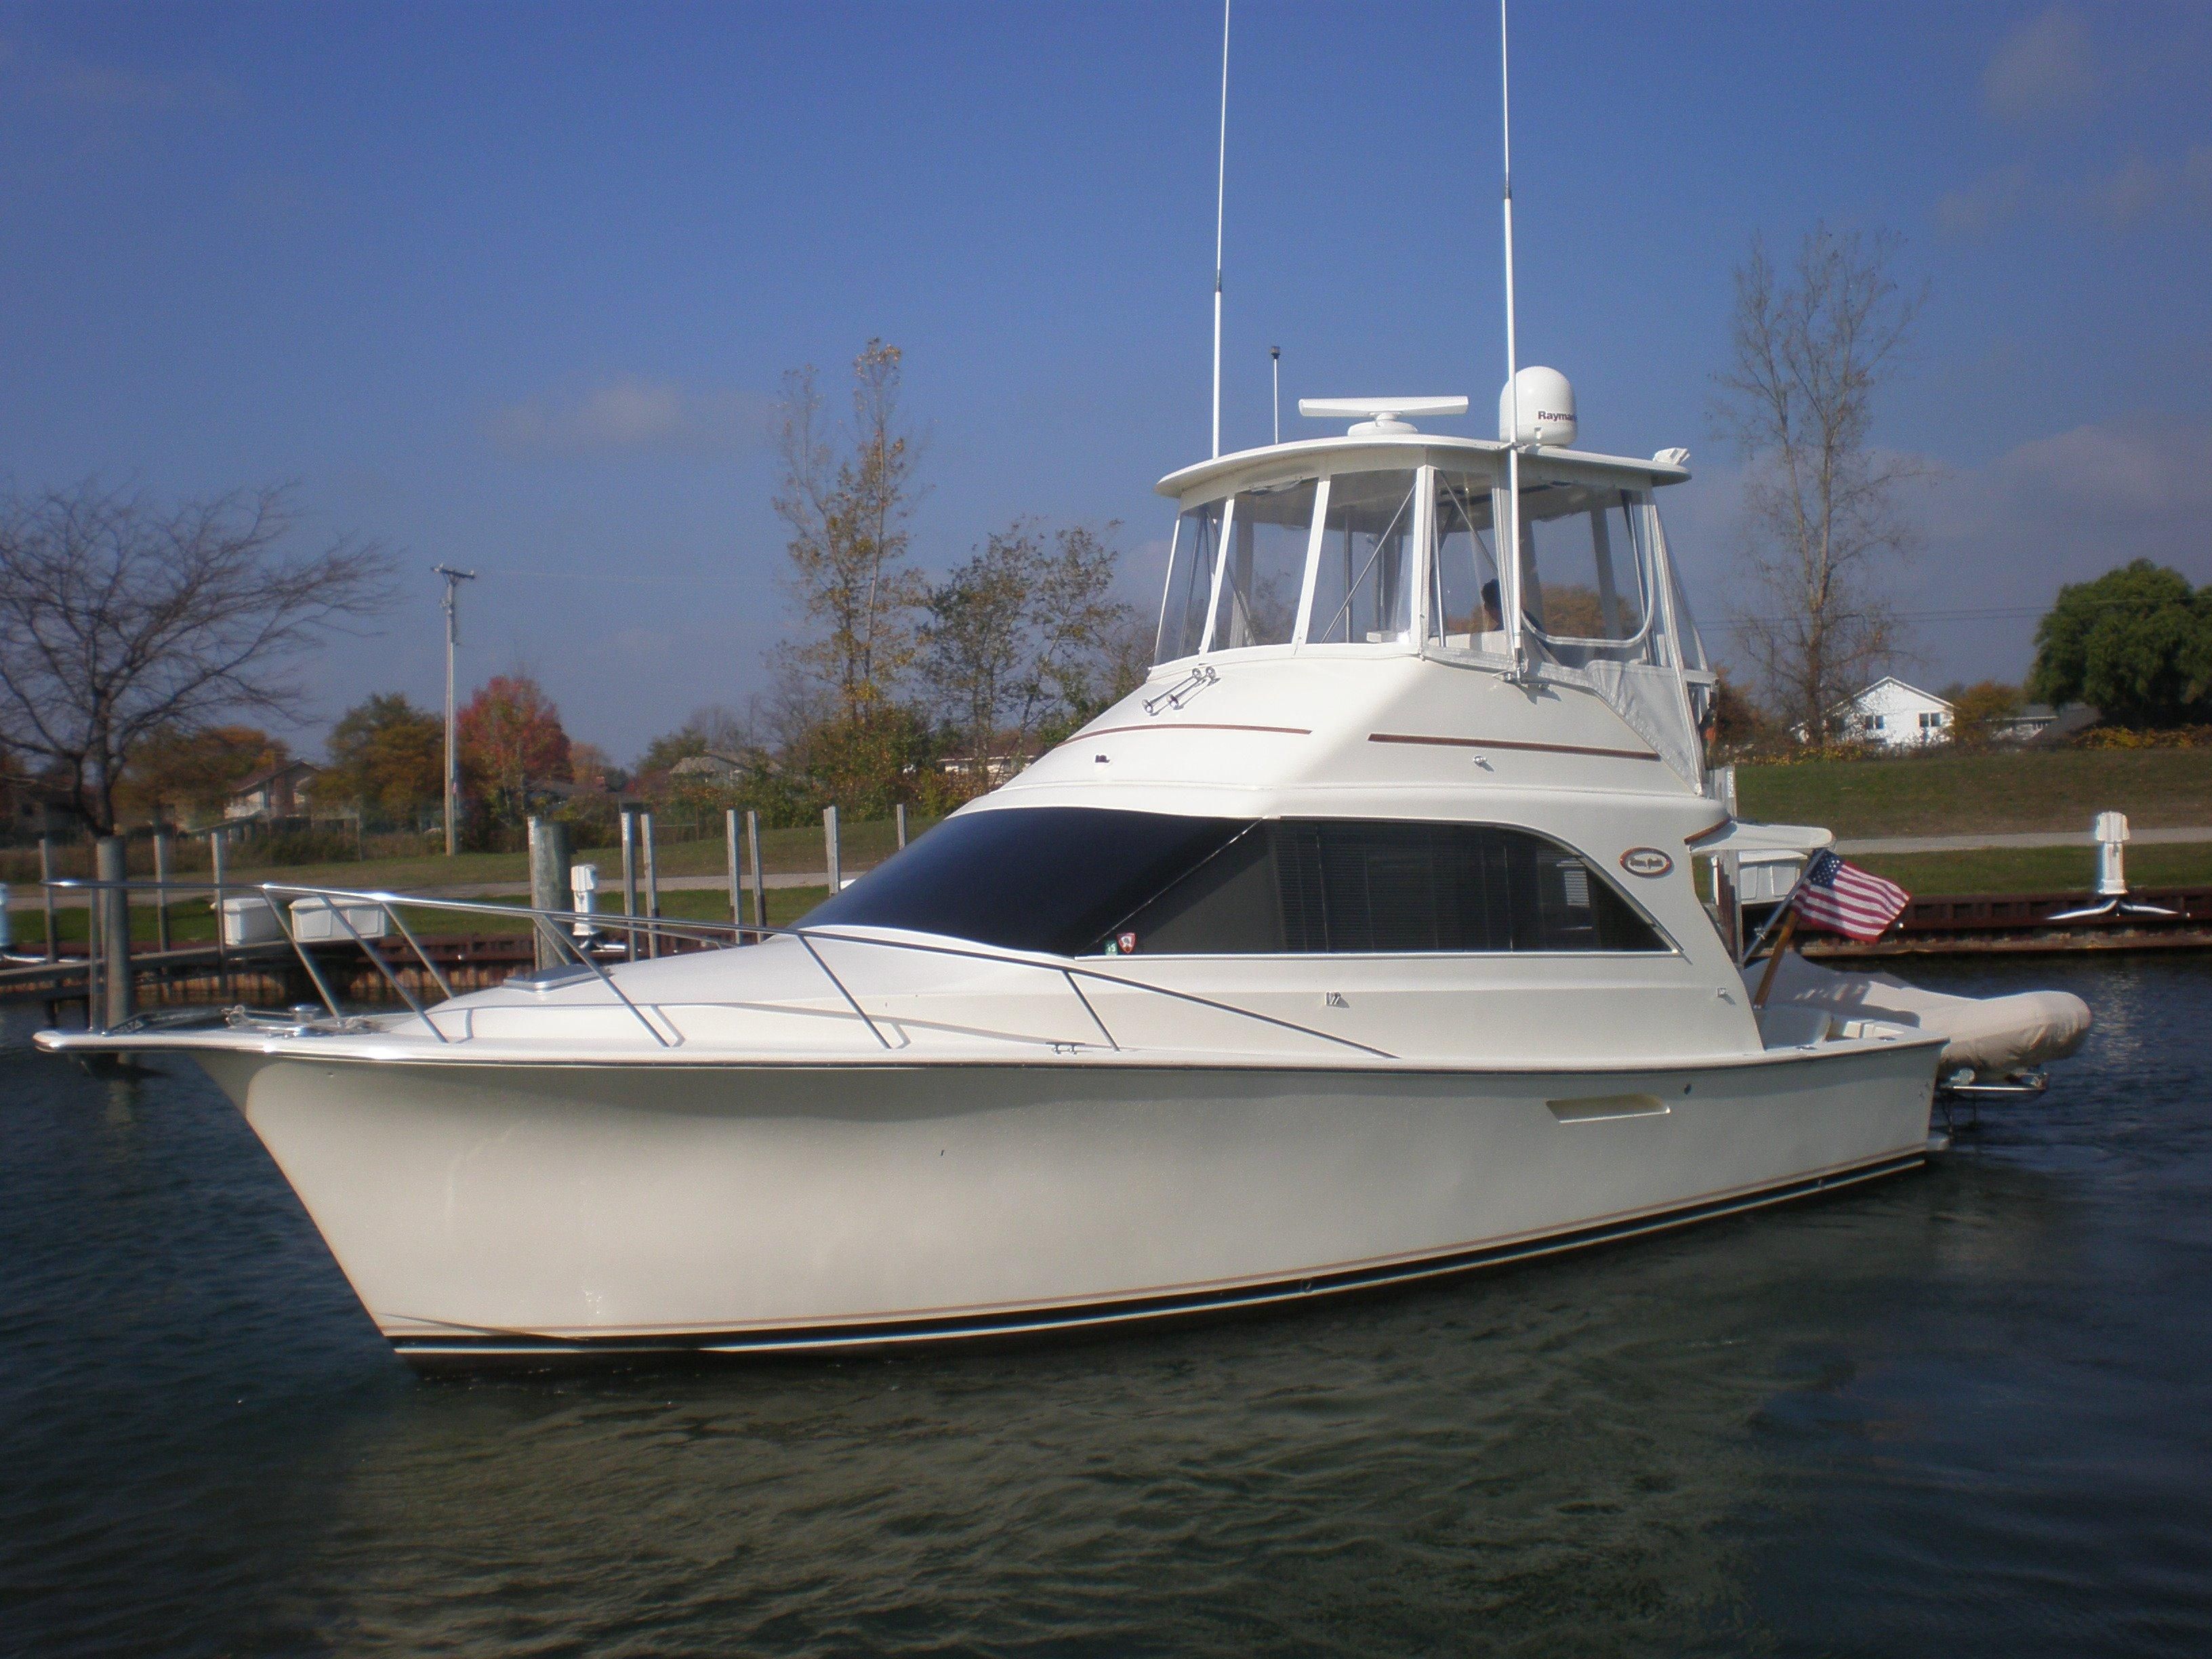 35 ft cruiser yacht for sale